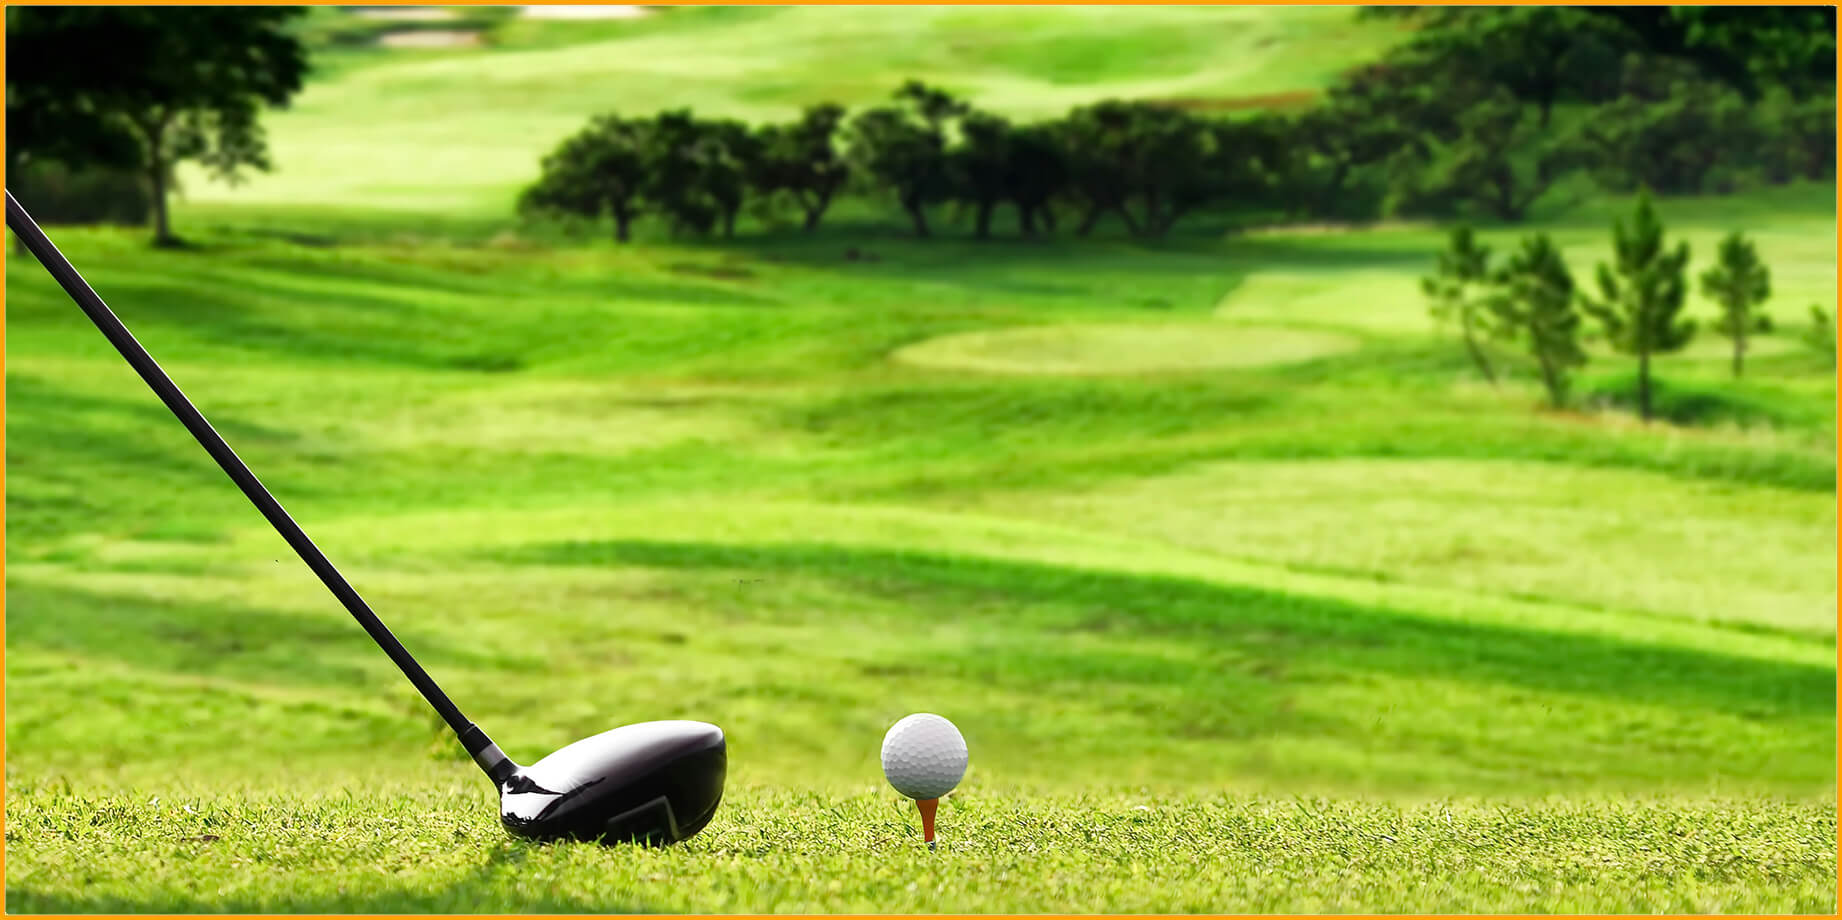 Golf Courses - Care Cleaning and Reclamation